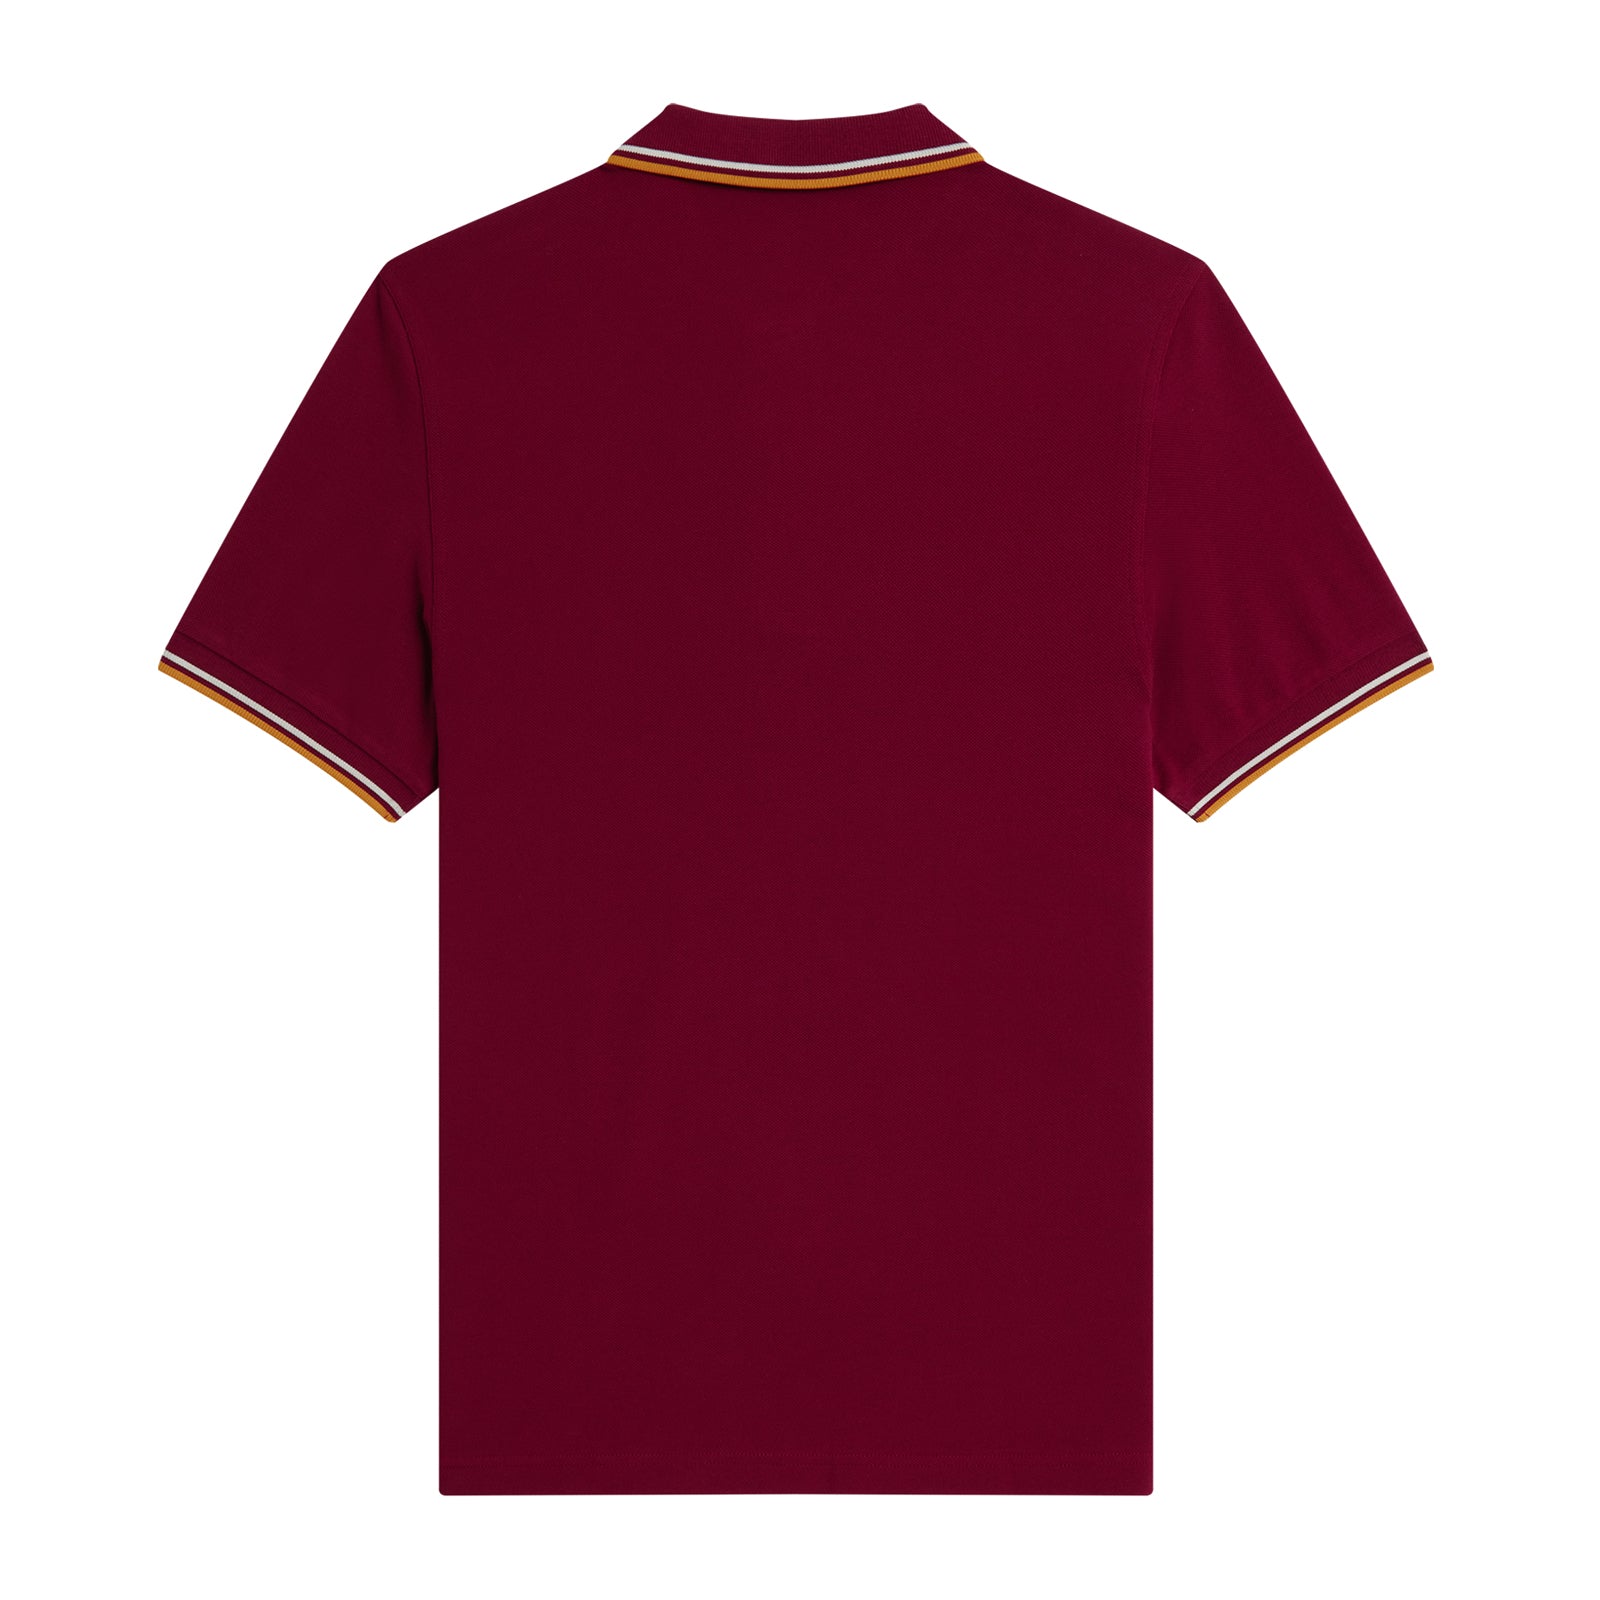 Fred Perry Twin Tipped Fred Perry Shirt Tawny Port/Gold/Gold. Foto de trás.